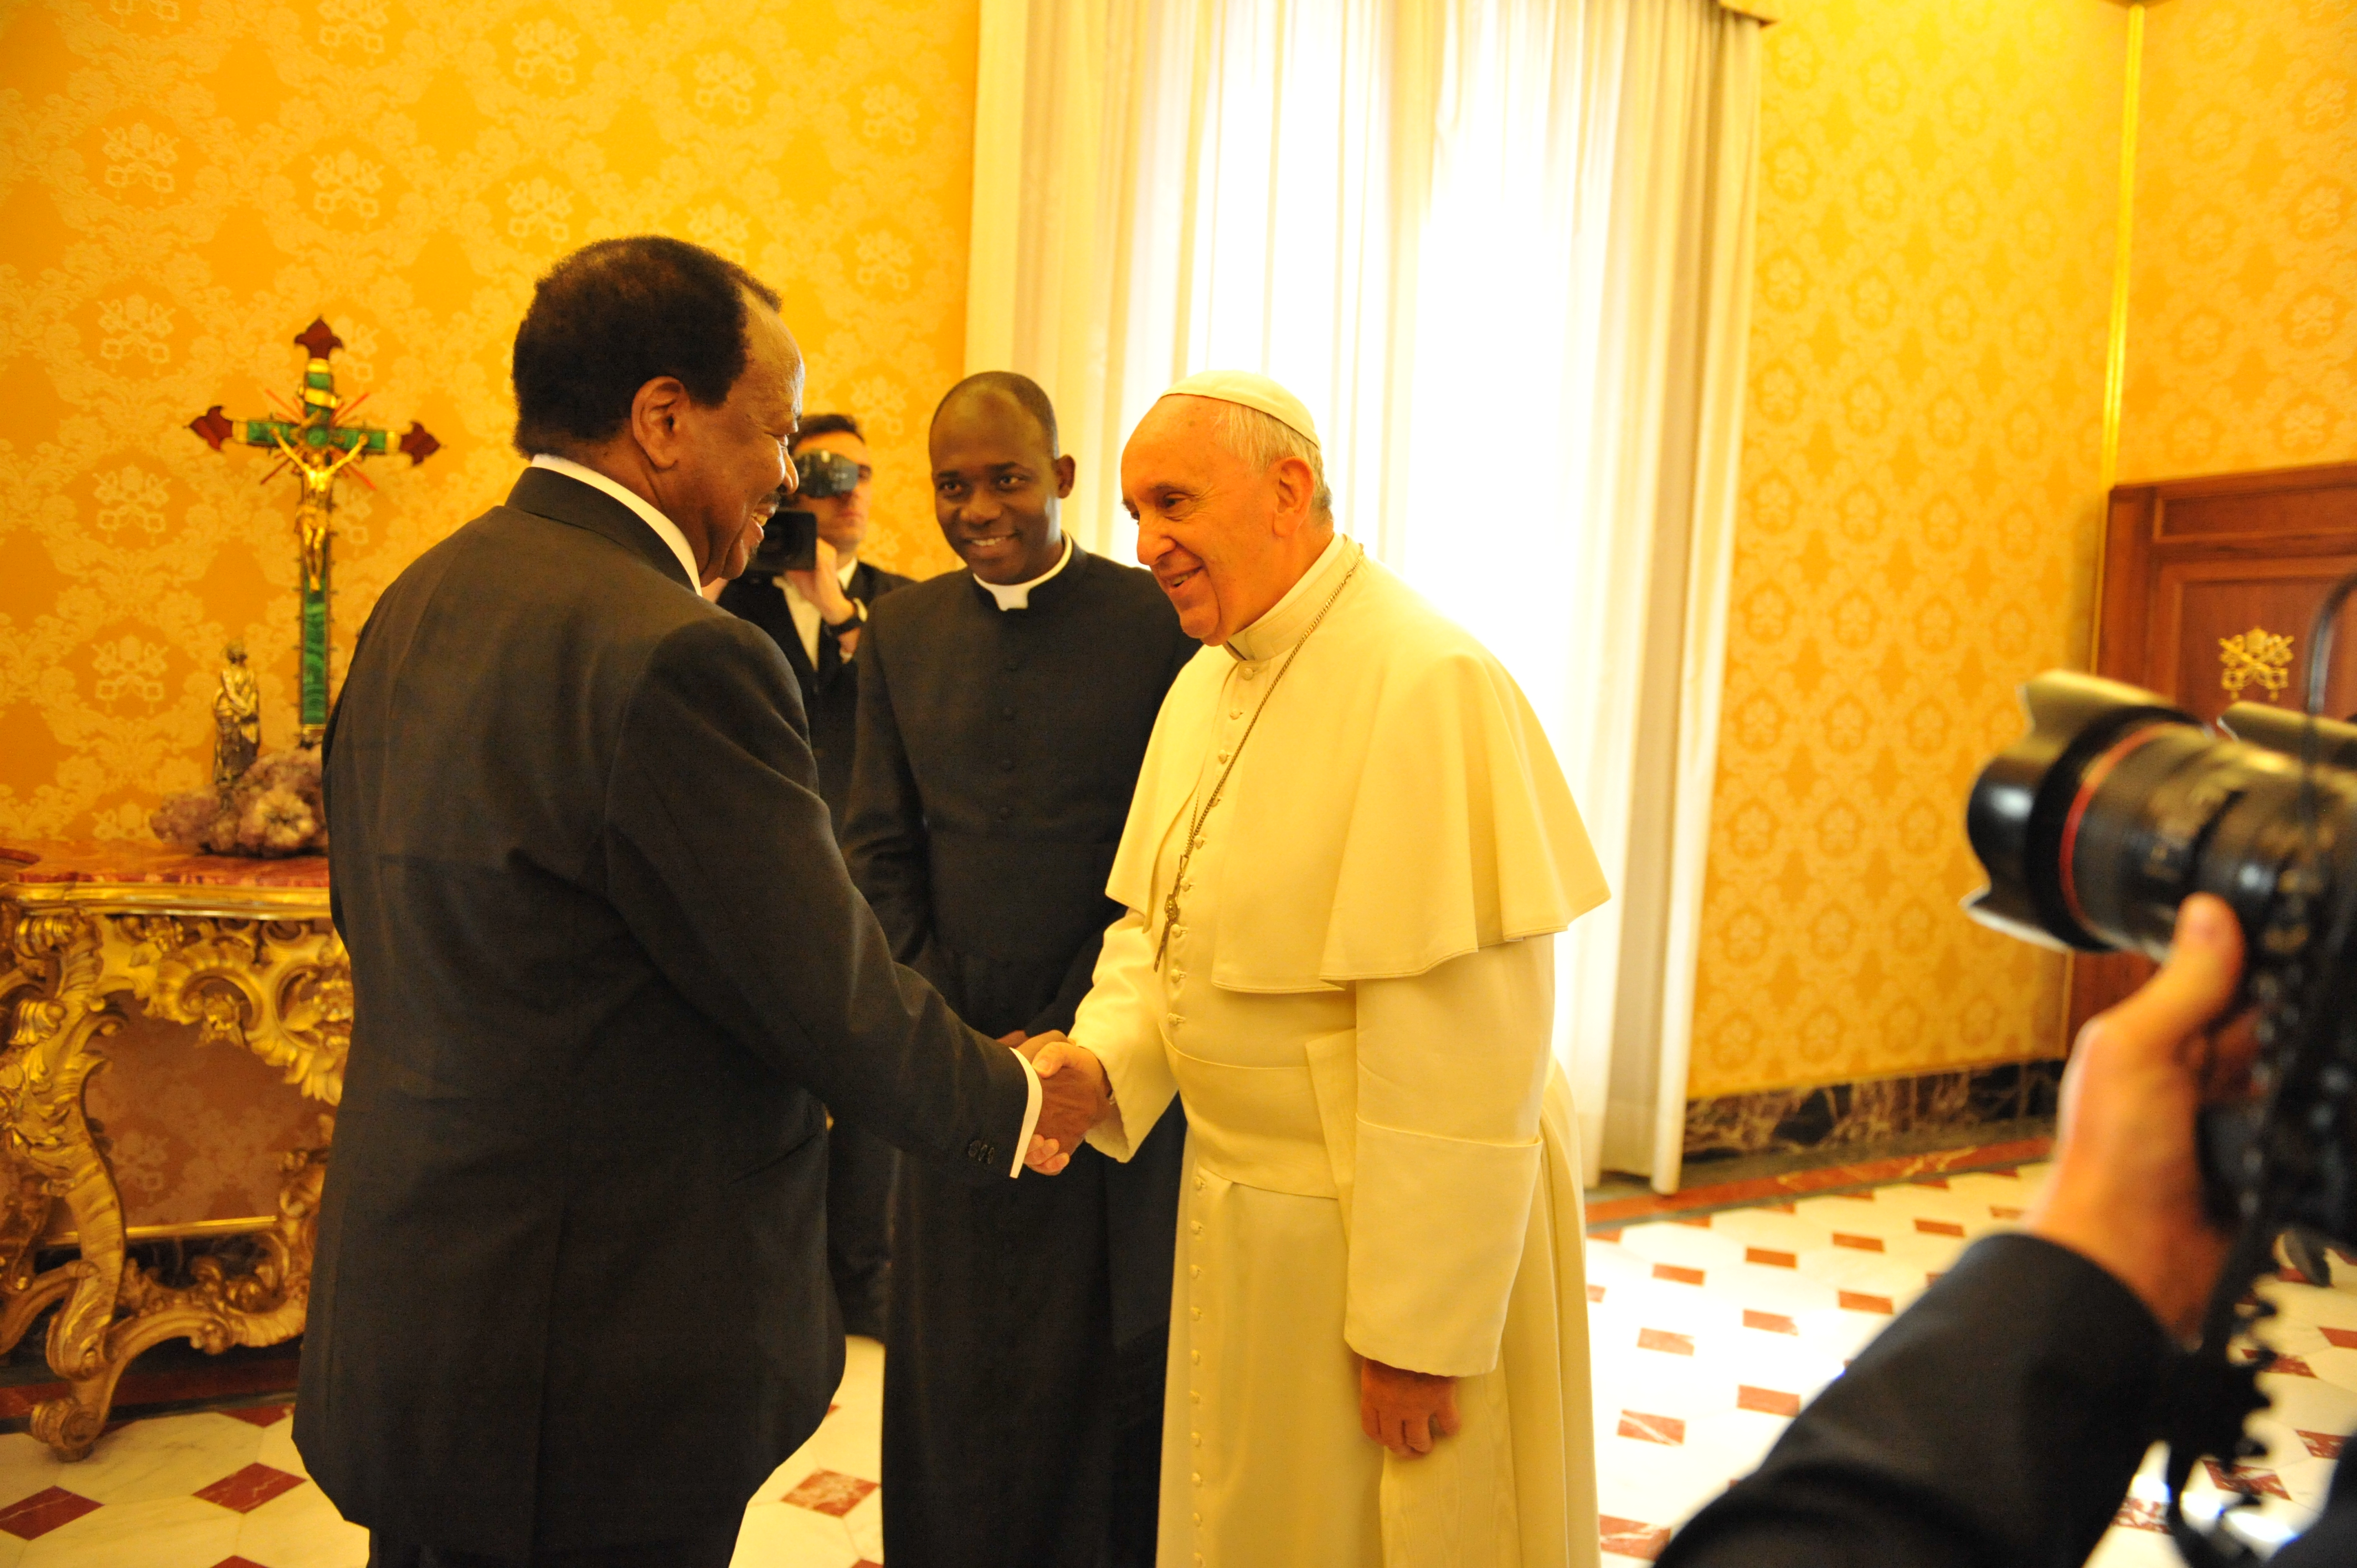 Official Visit of the Head of State to the Vatican